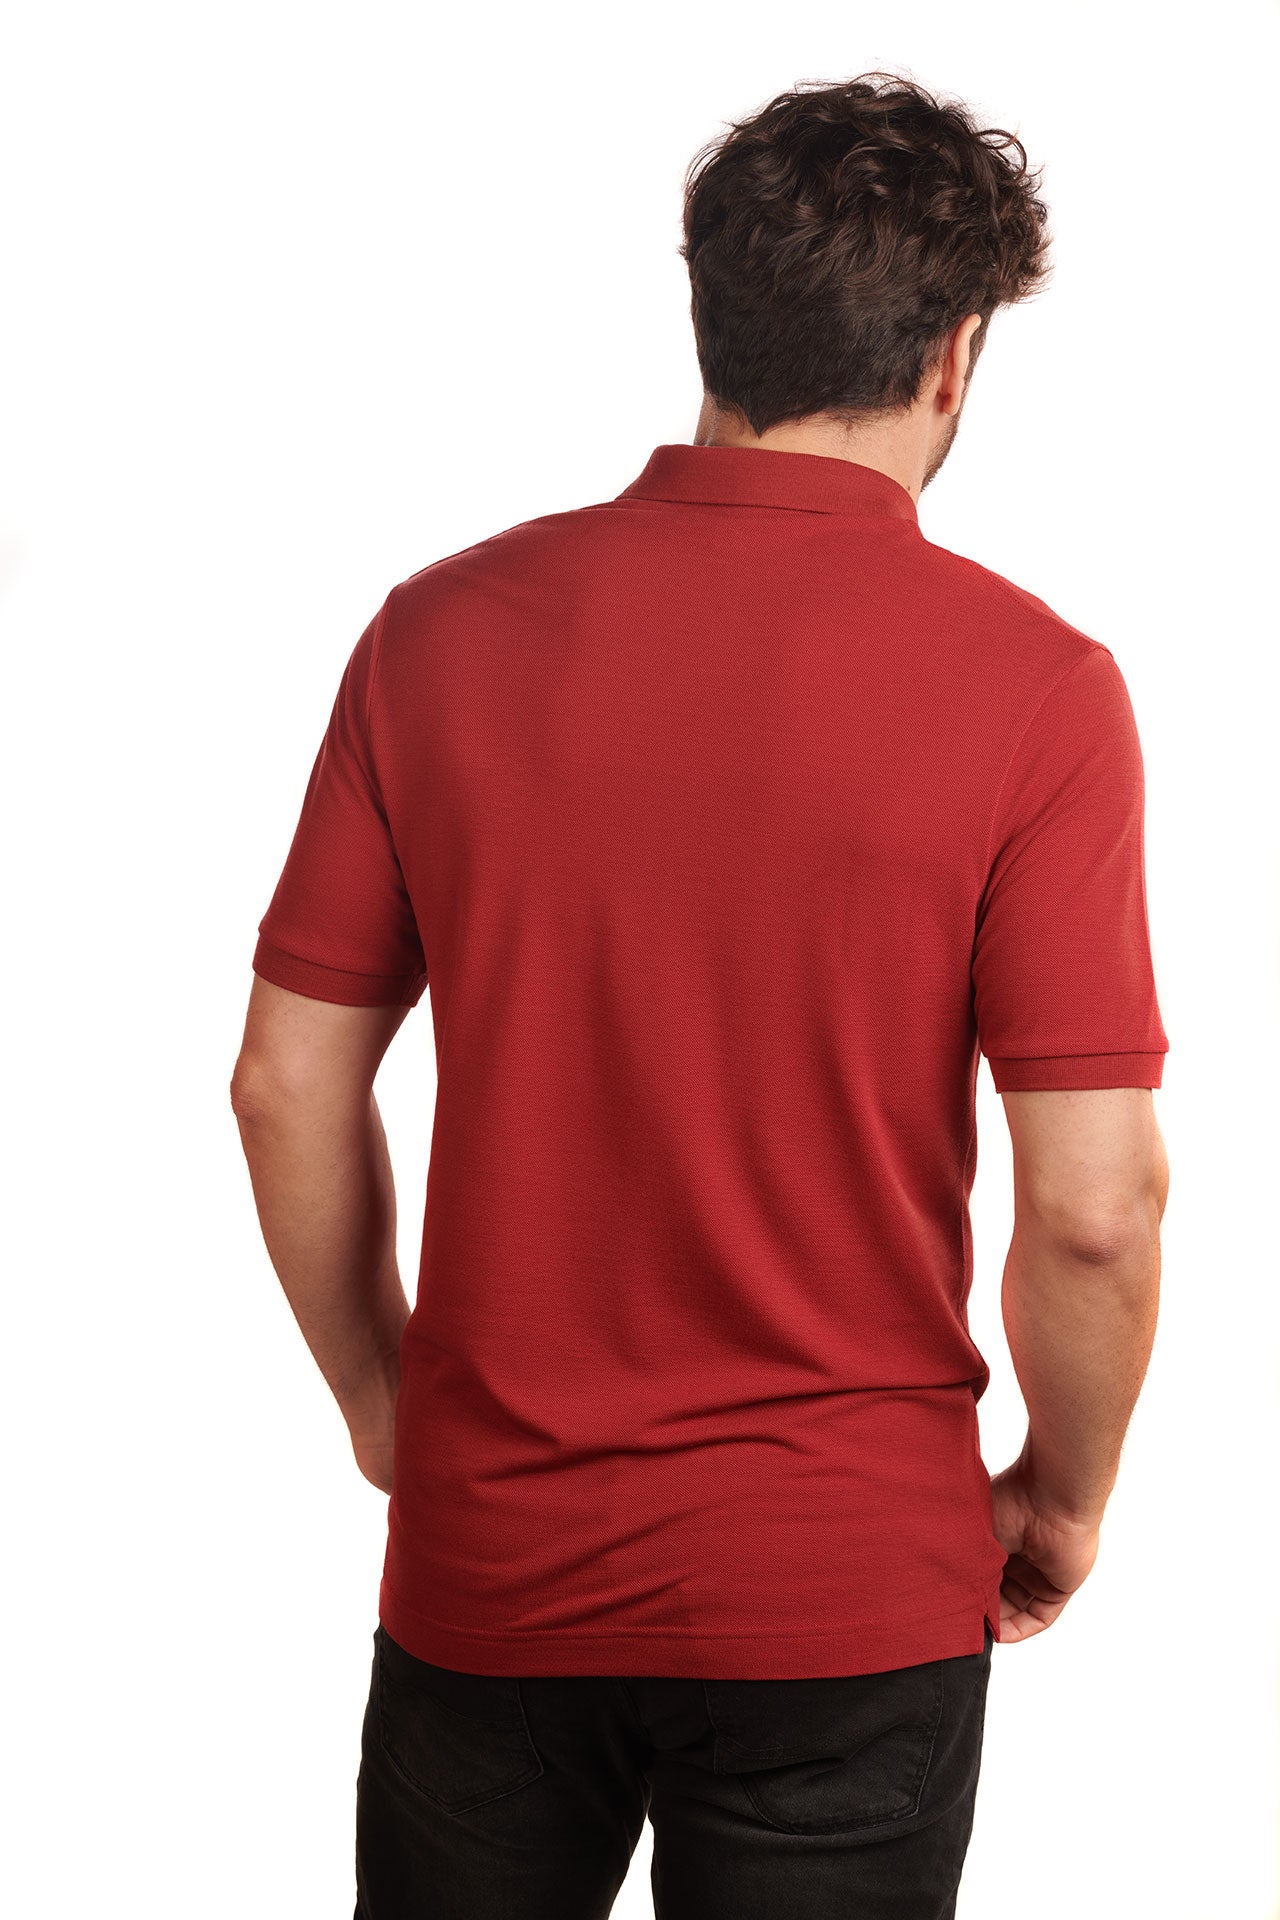 terra-red-biodegradable-pure-merino-wool-golf-polo-shirt-for men-by-snöleo.-back-of-model-view.